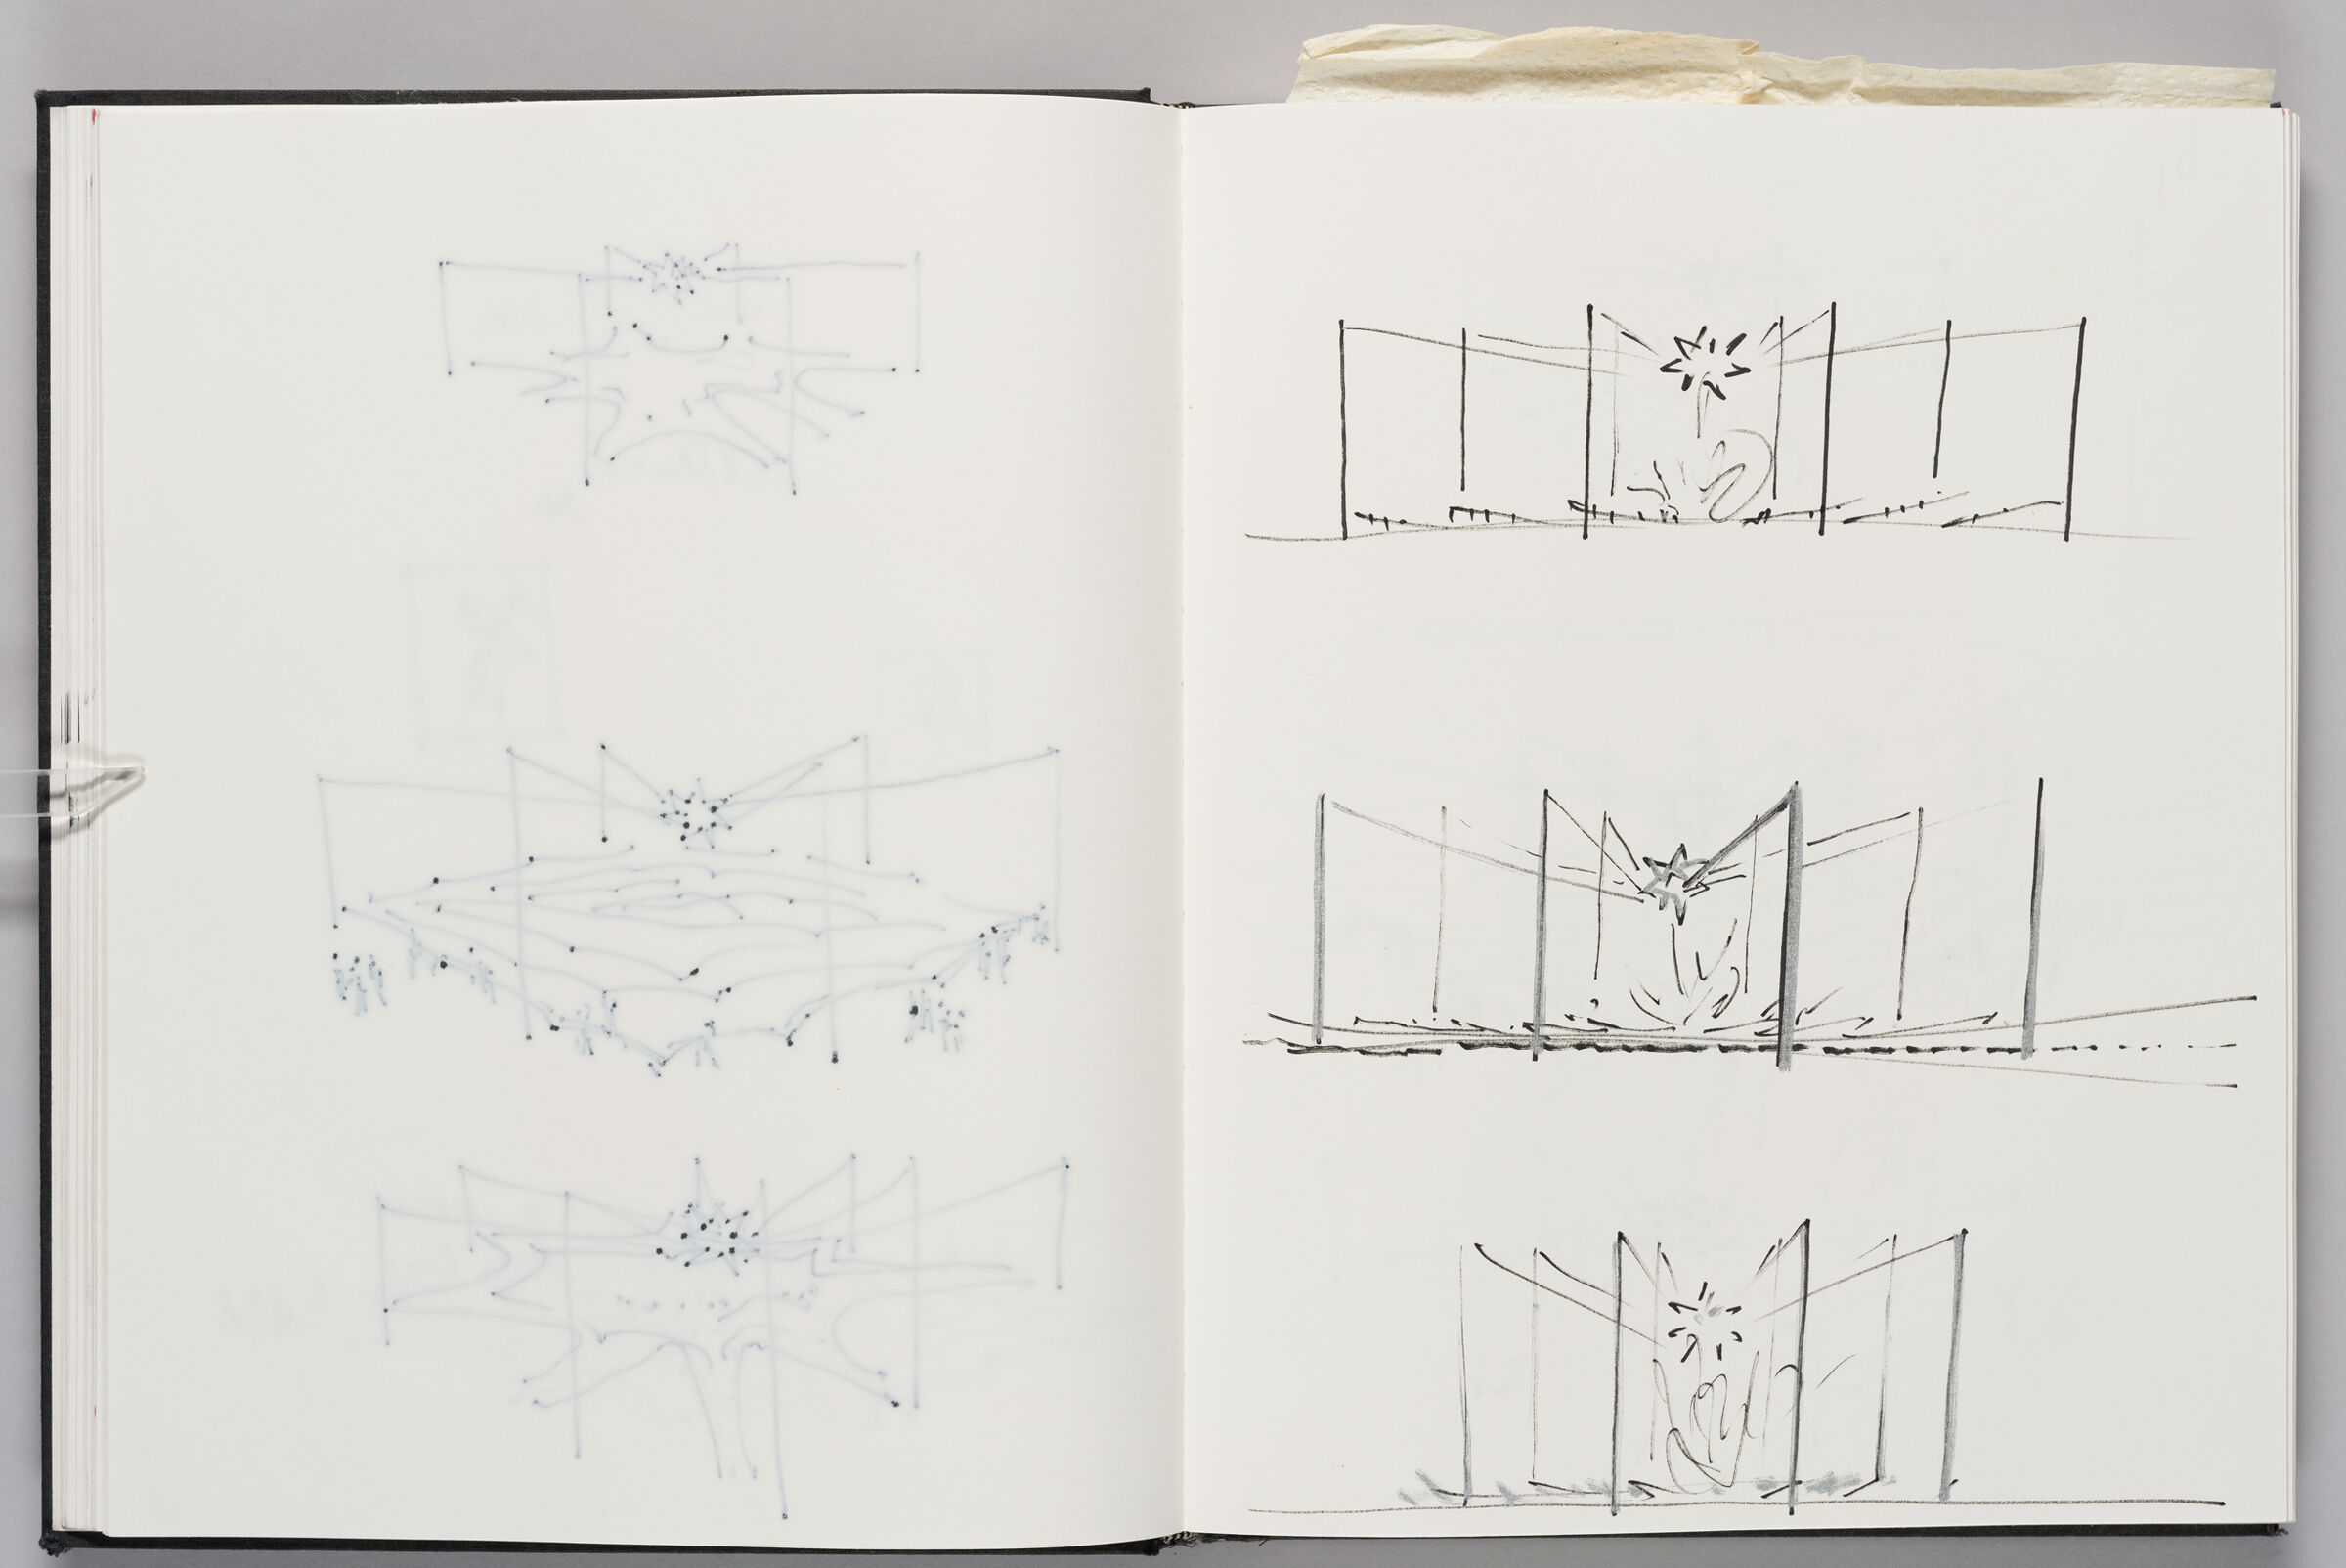 Untitled (Bleed-Through Of Previous Page, Left Page); Untitled (Media Park Fountain Designs, Right Page)